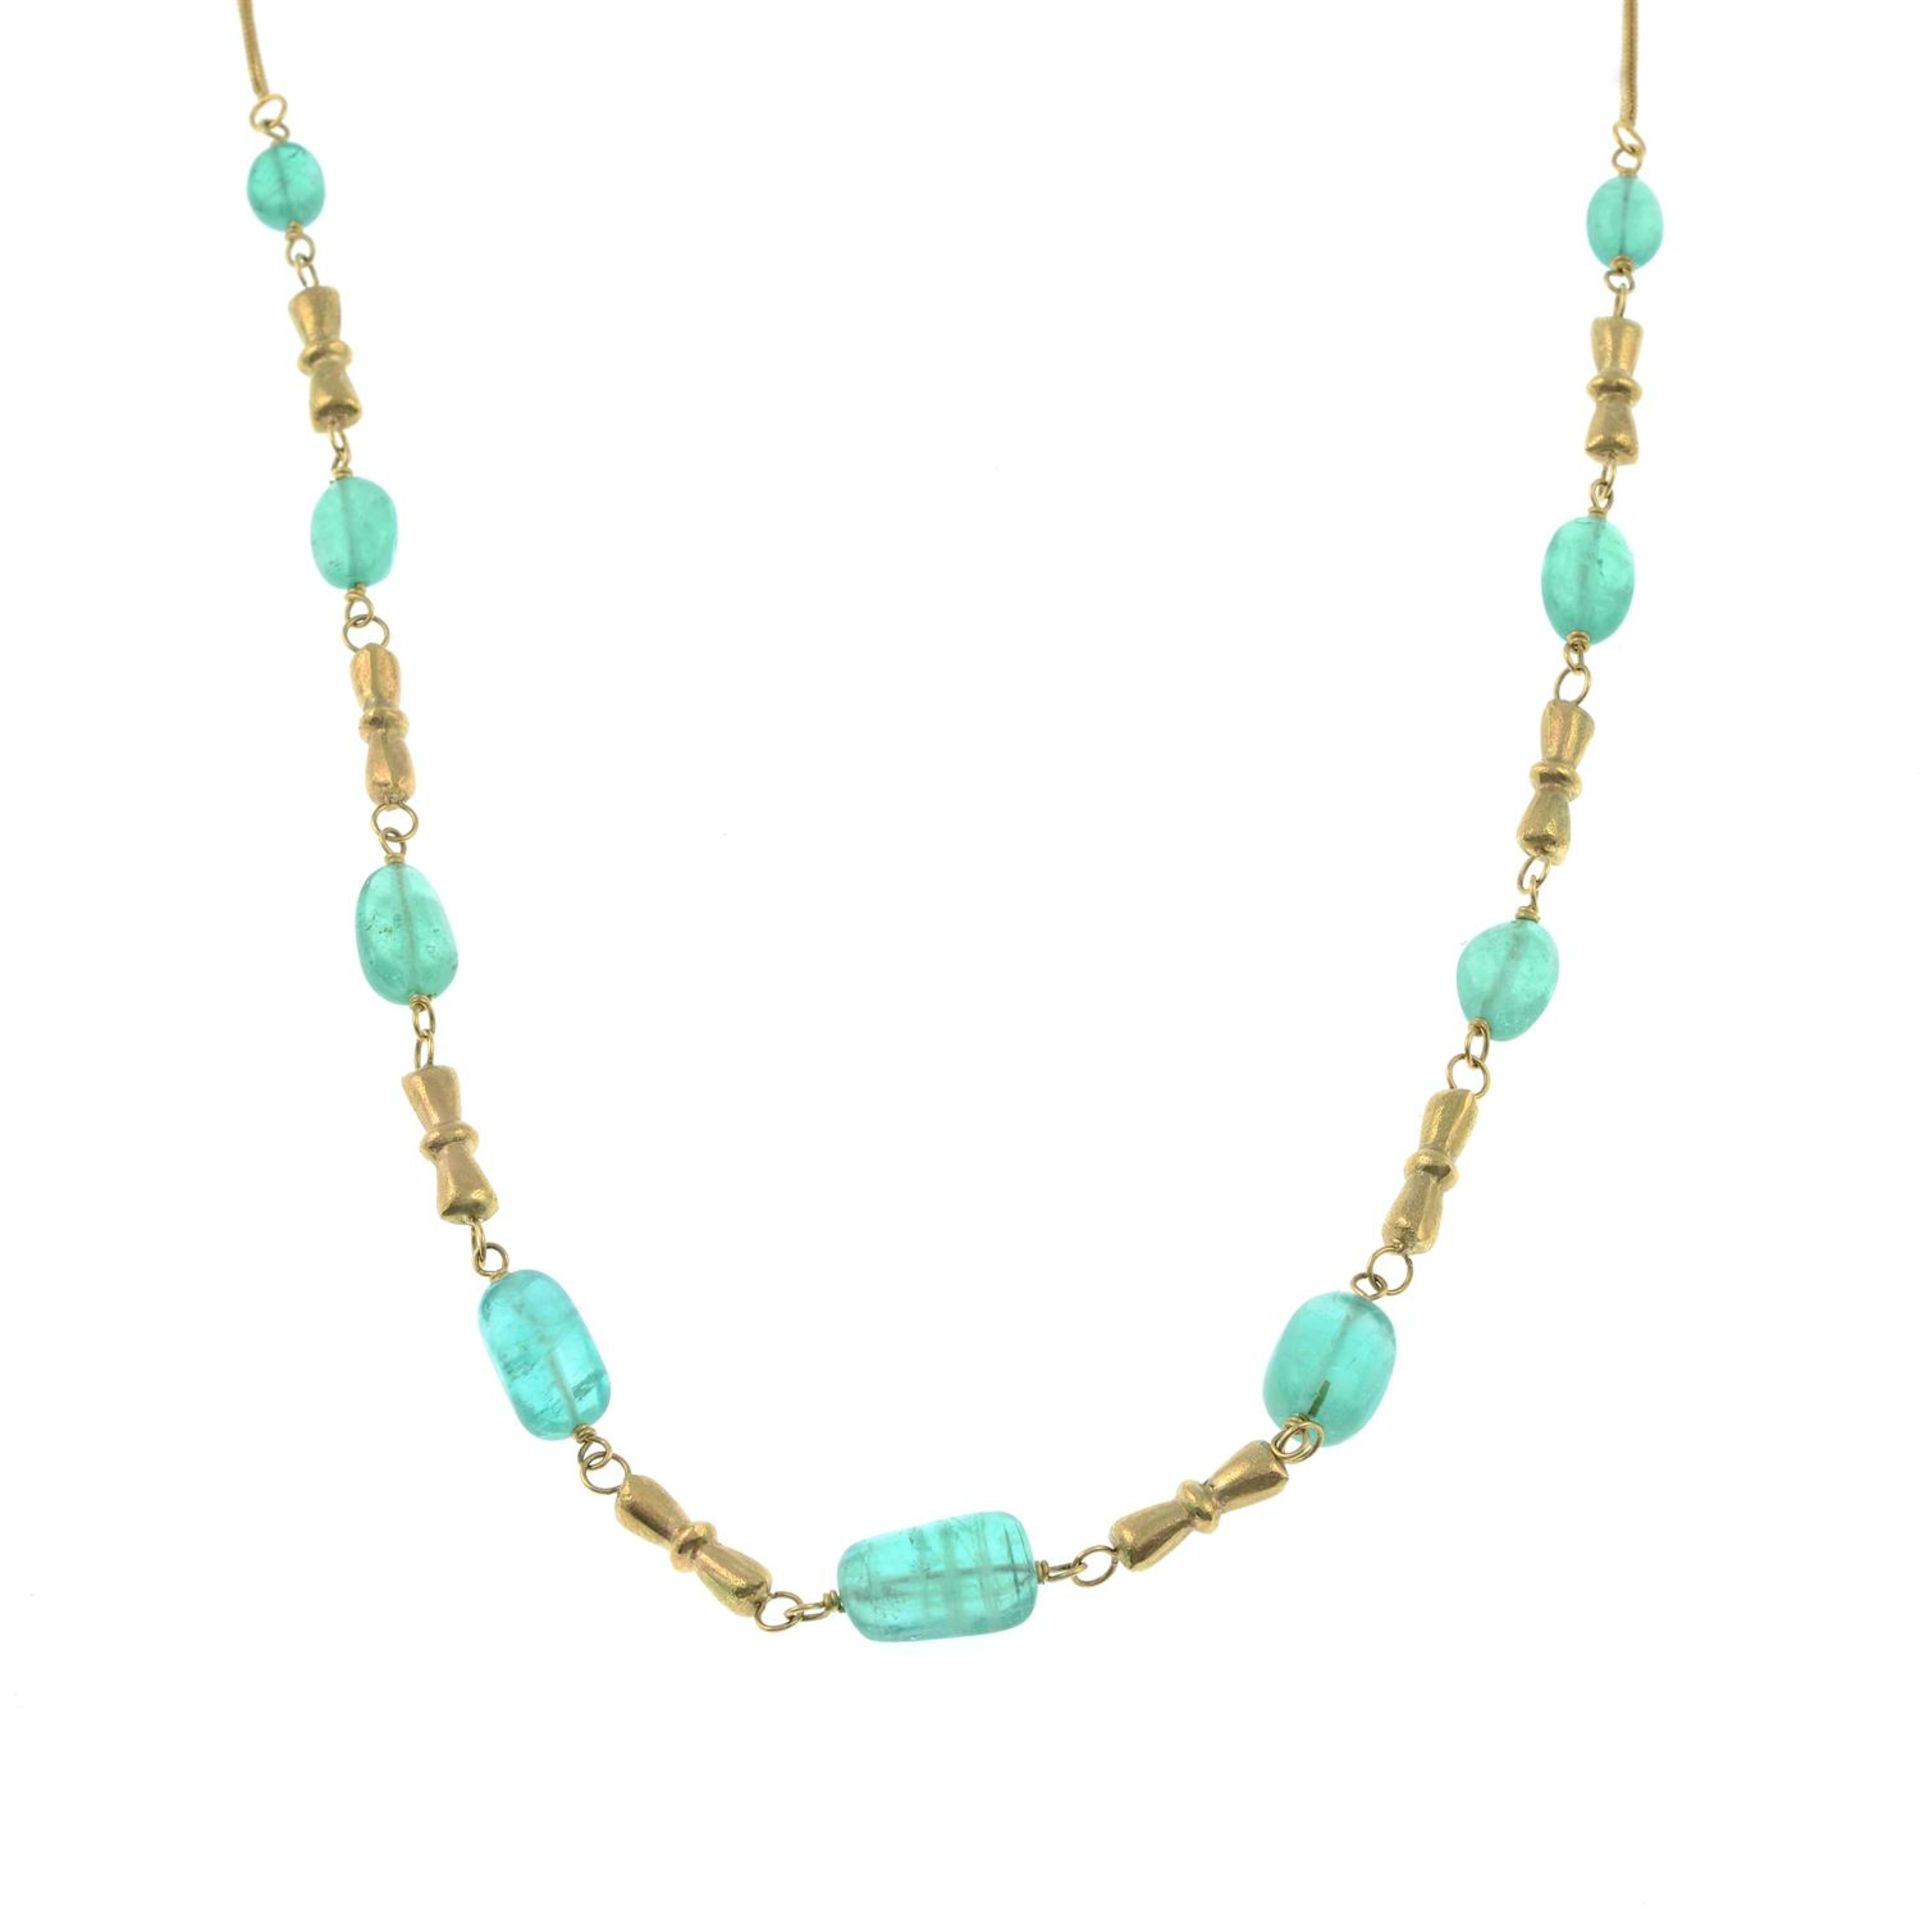 A Colombian emerald bead necklace, with bar spacers.